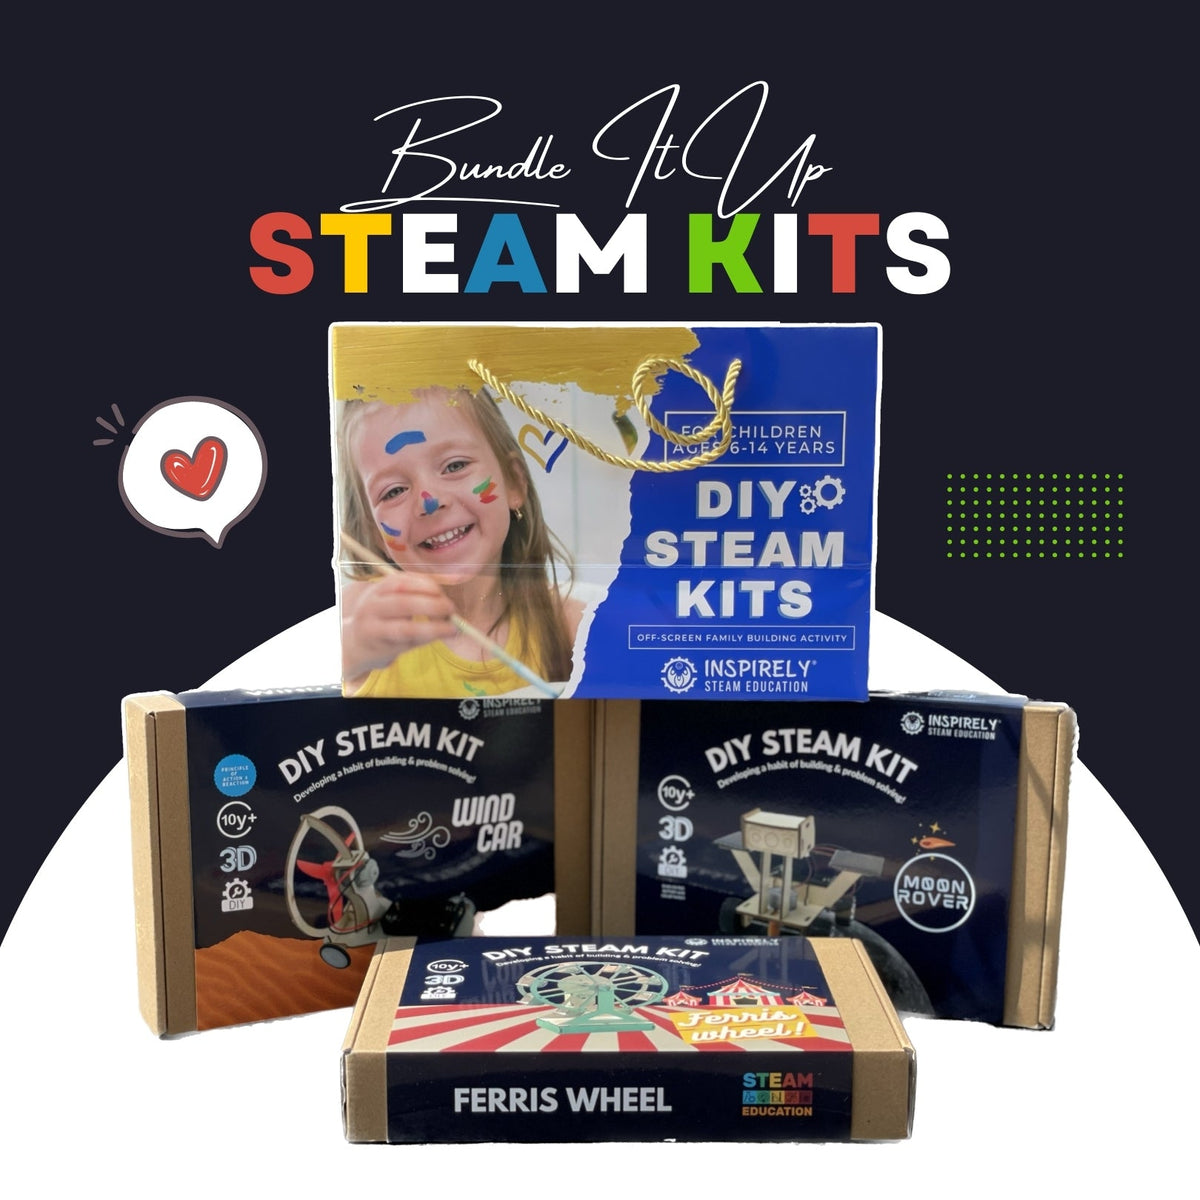 DIY Ferris Wheel - STEM / STEAM / Excellent Science Kit | Holiday Christmas Corporate Gift for family | Ages 6-99 years - Inspirely | STEAM Education